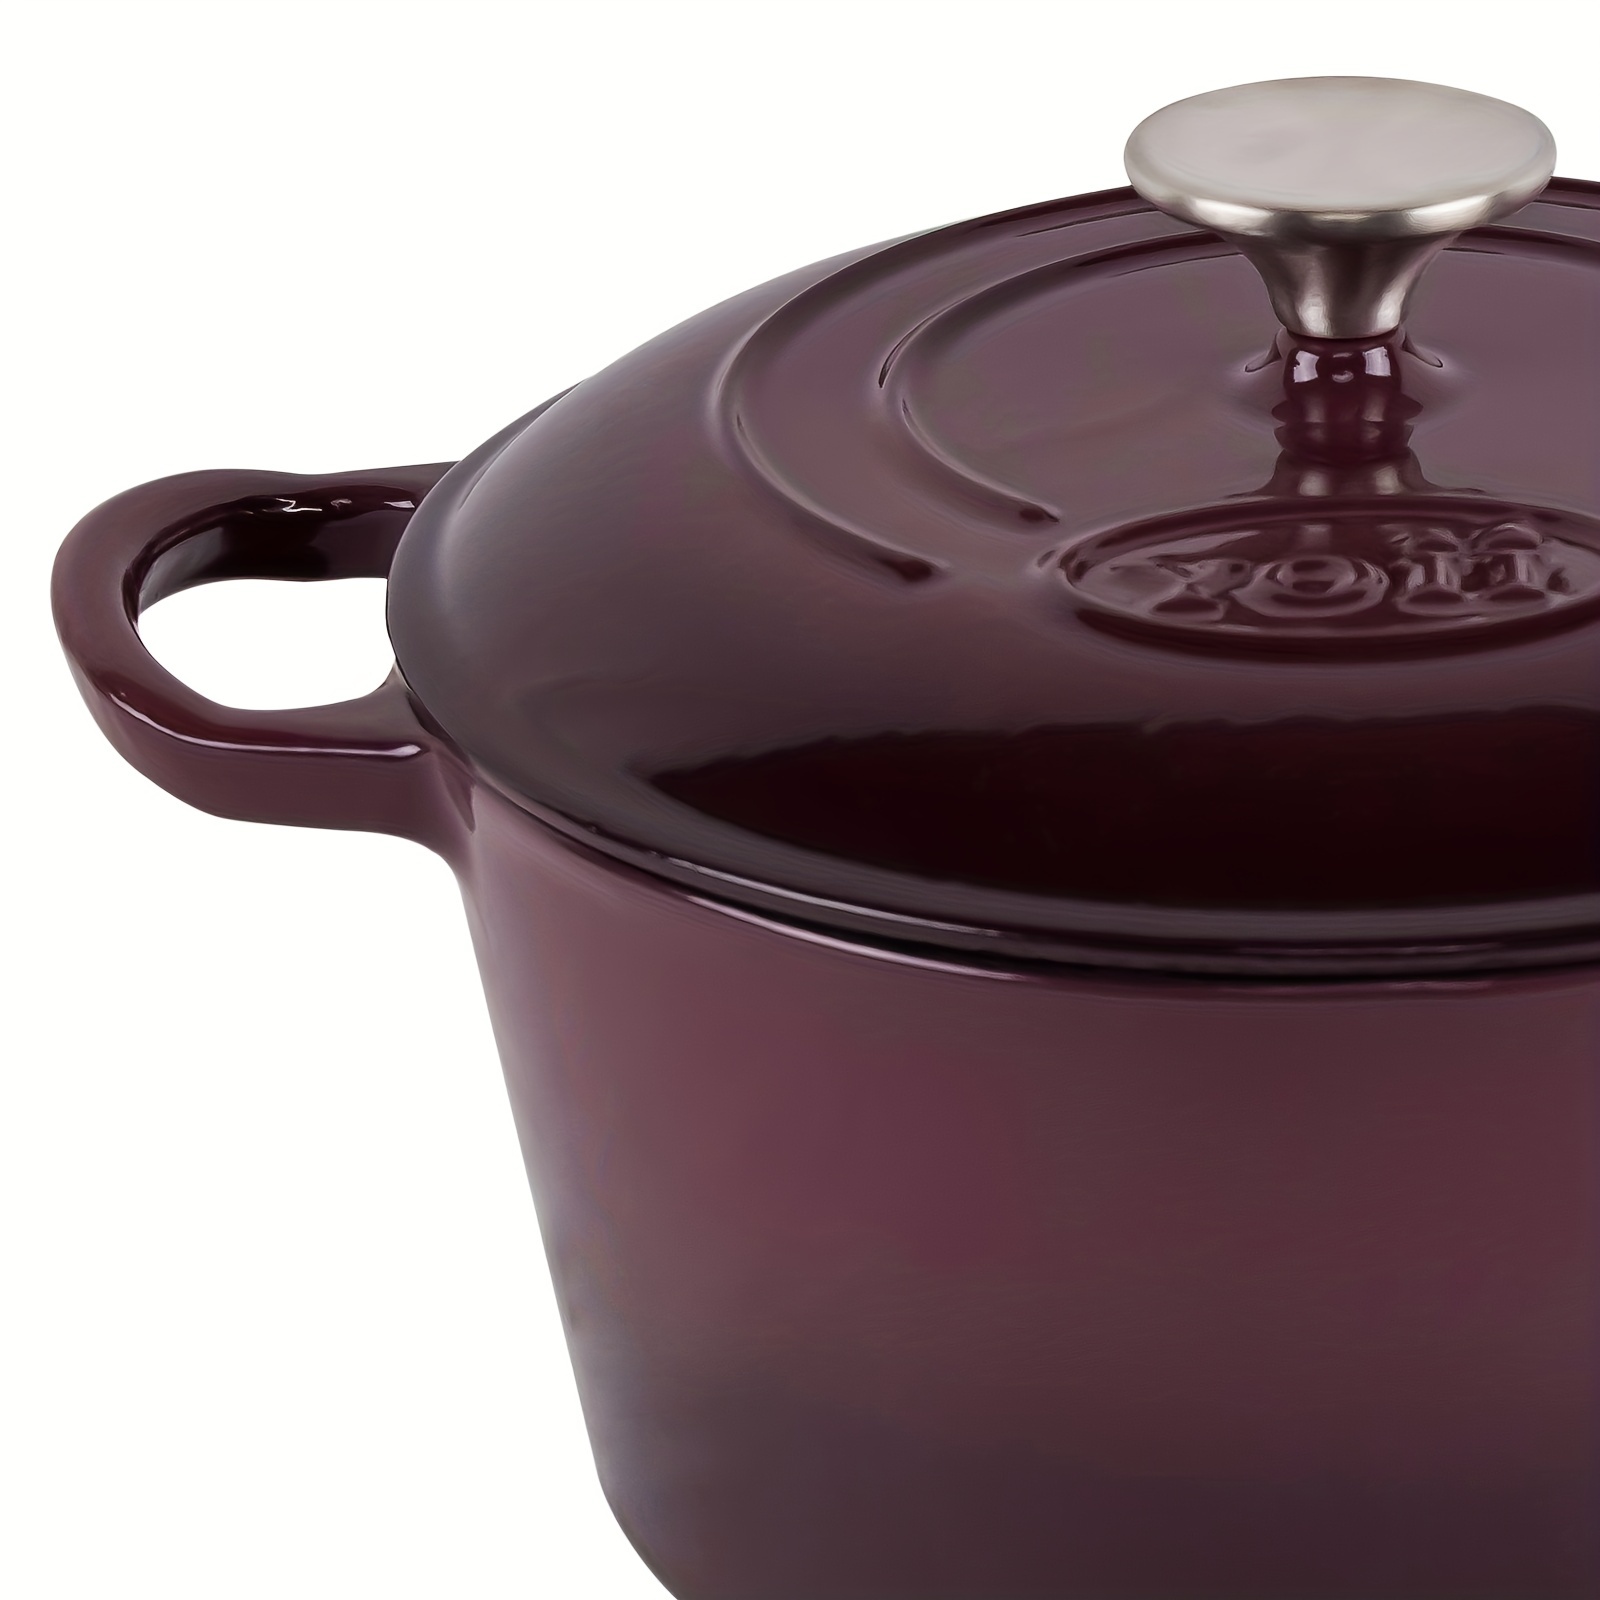 1pc, Enameled Cast Iron Dutch Oven With Lid (5.71''), Small Enamel Pot With